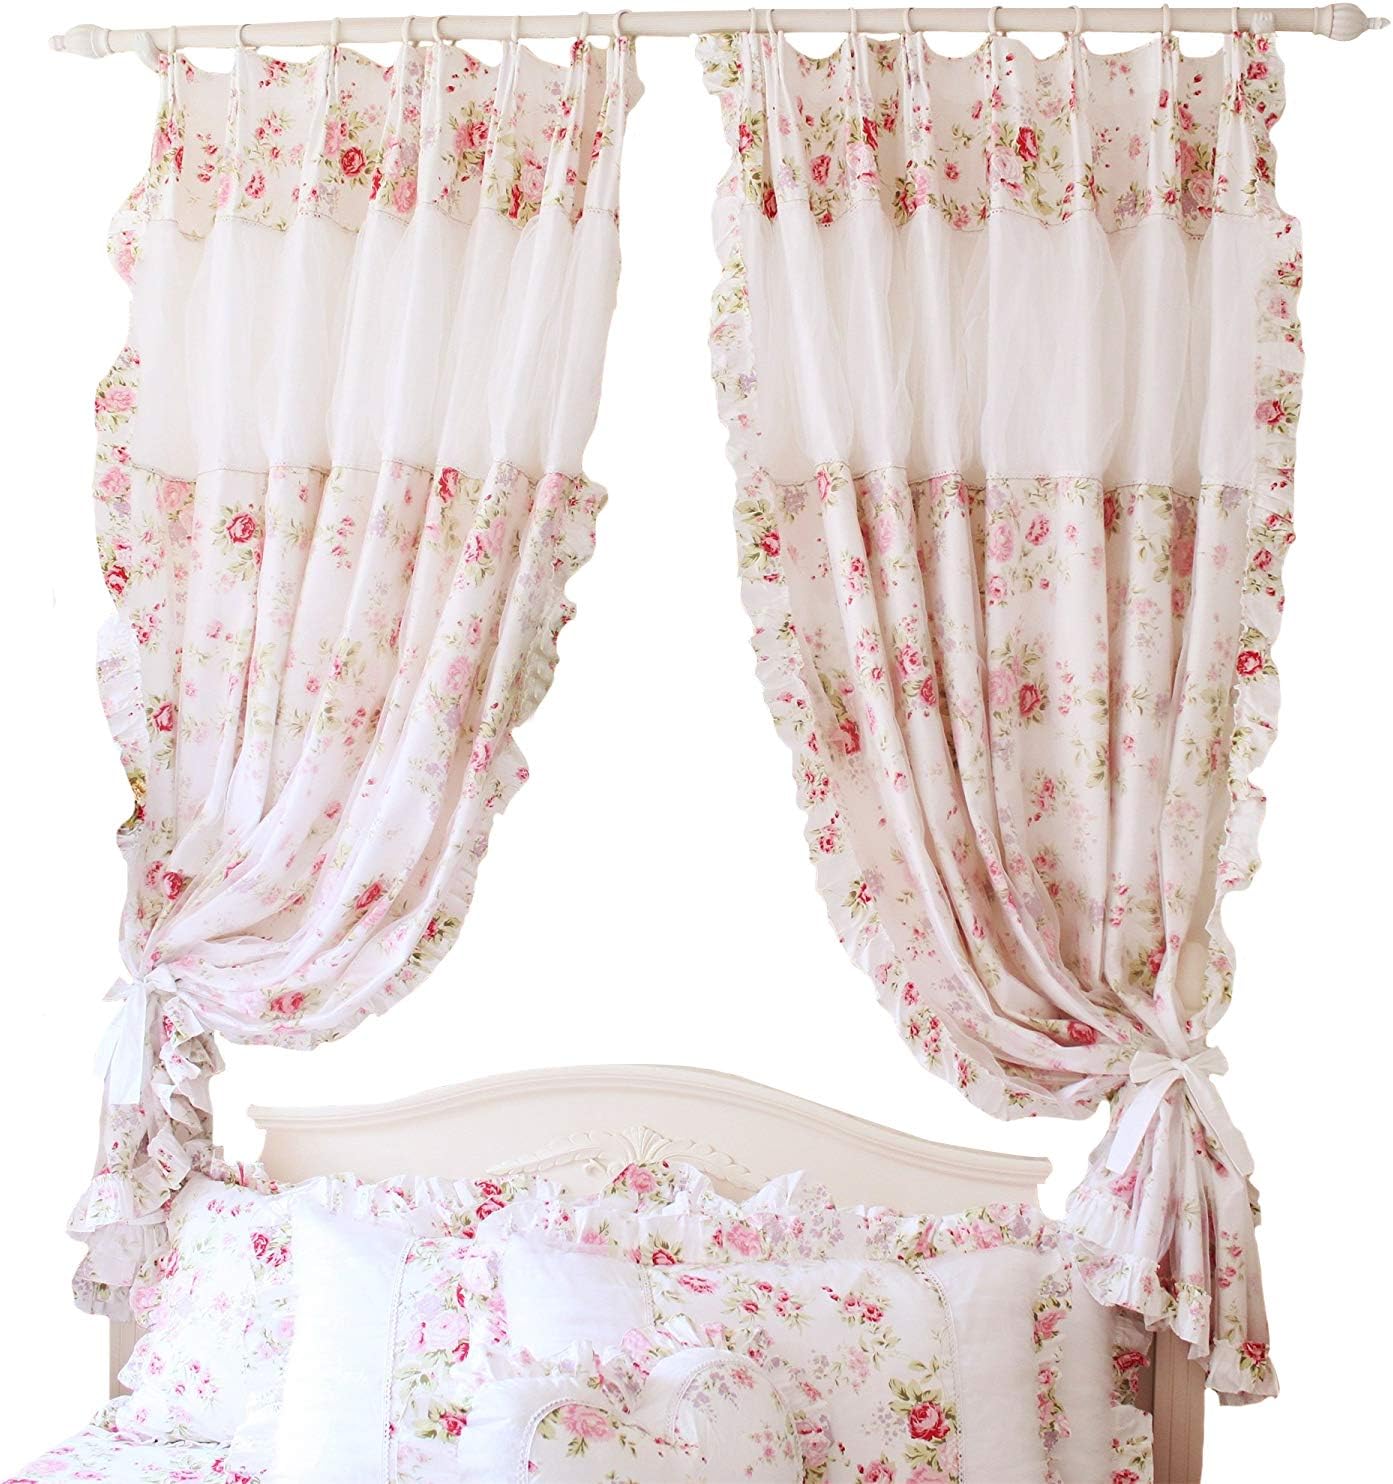 FADFAY White Lace Fancy Sheer Curtain Romantic Girls Princess Curtain Pink Floral Curtain Panels Bedroom Floral Windowtreatment(Two Panels)